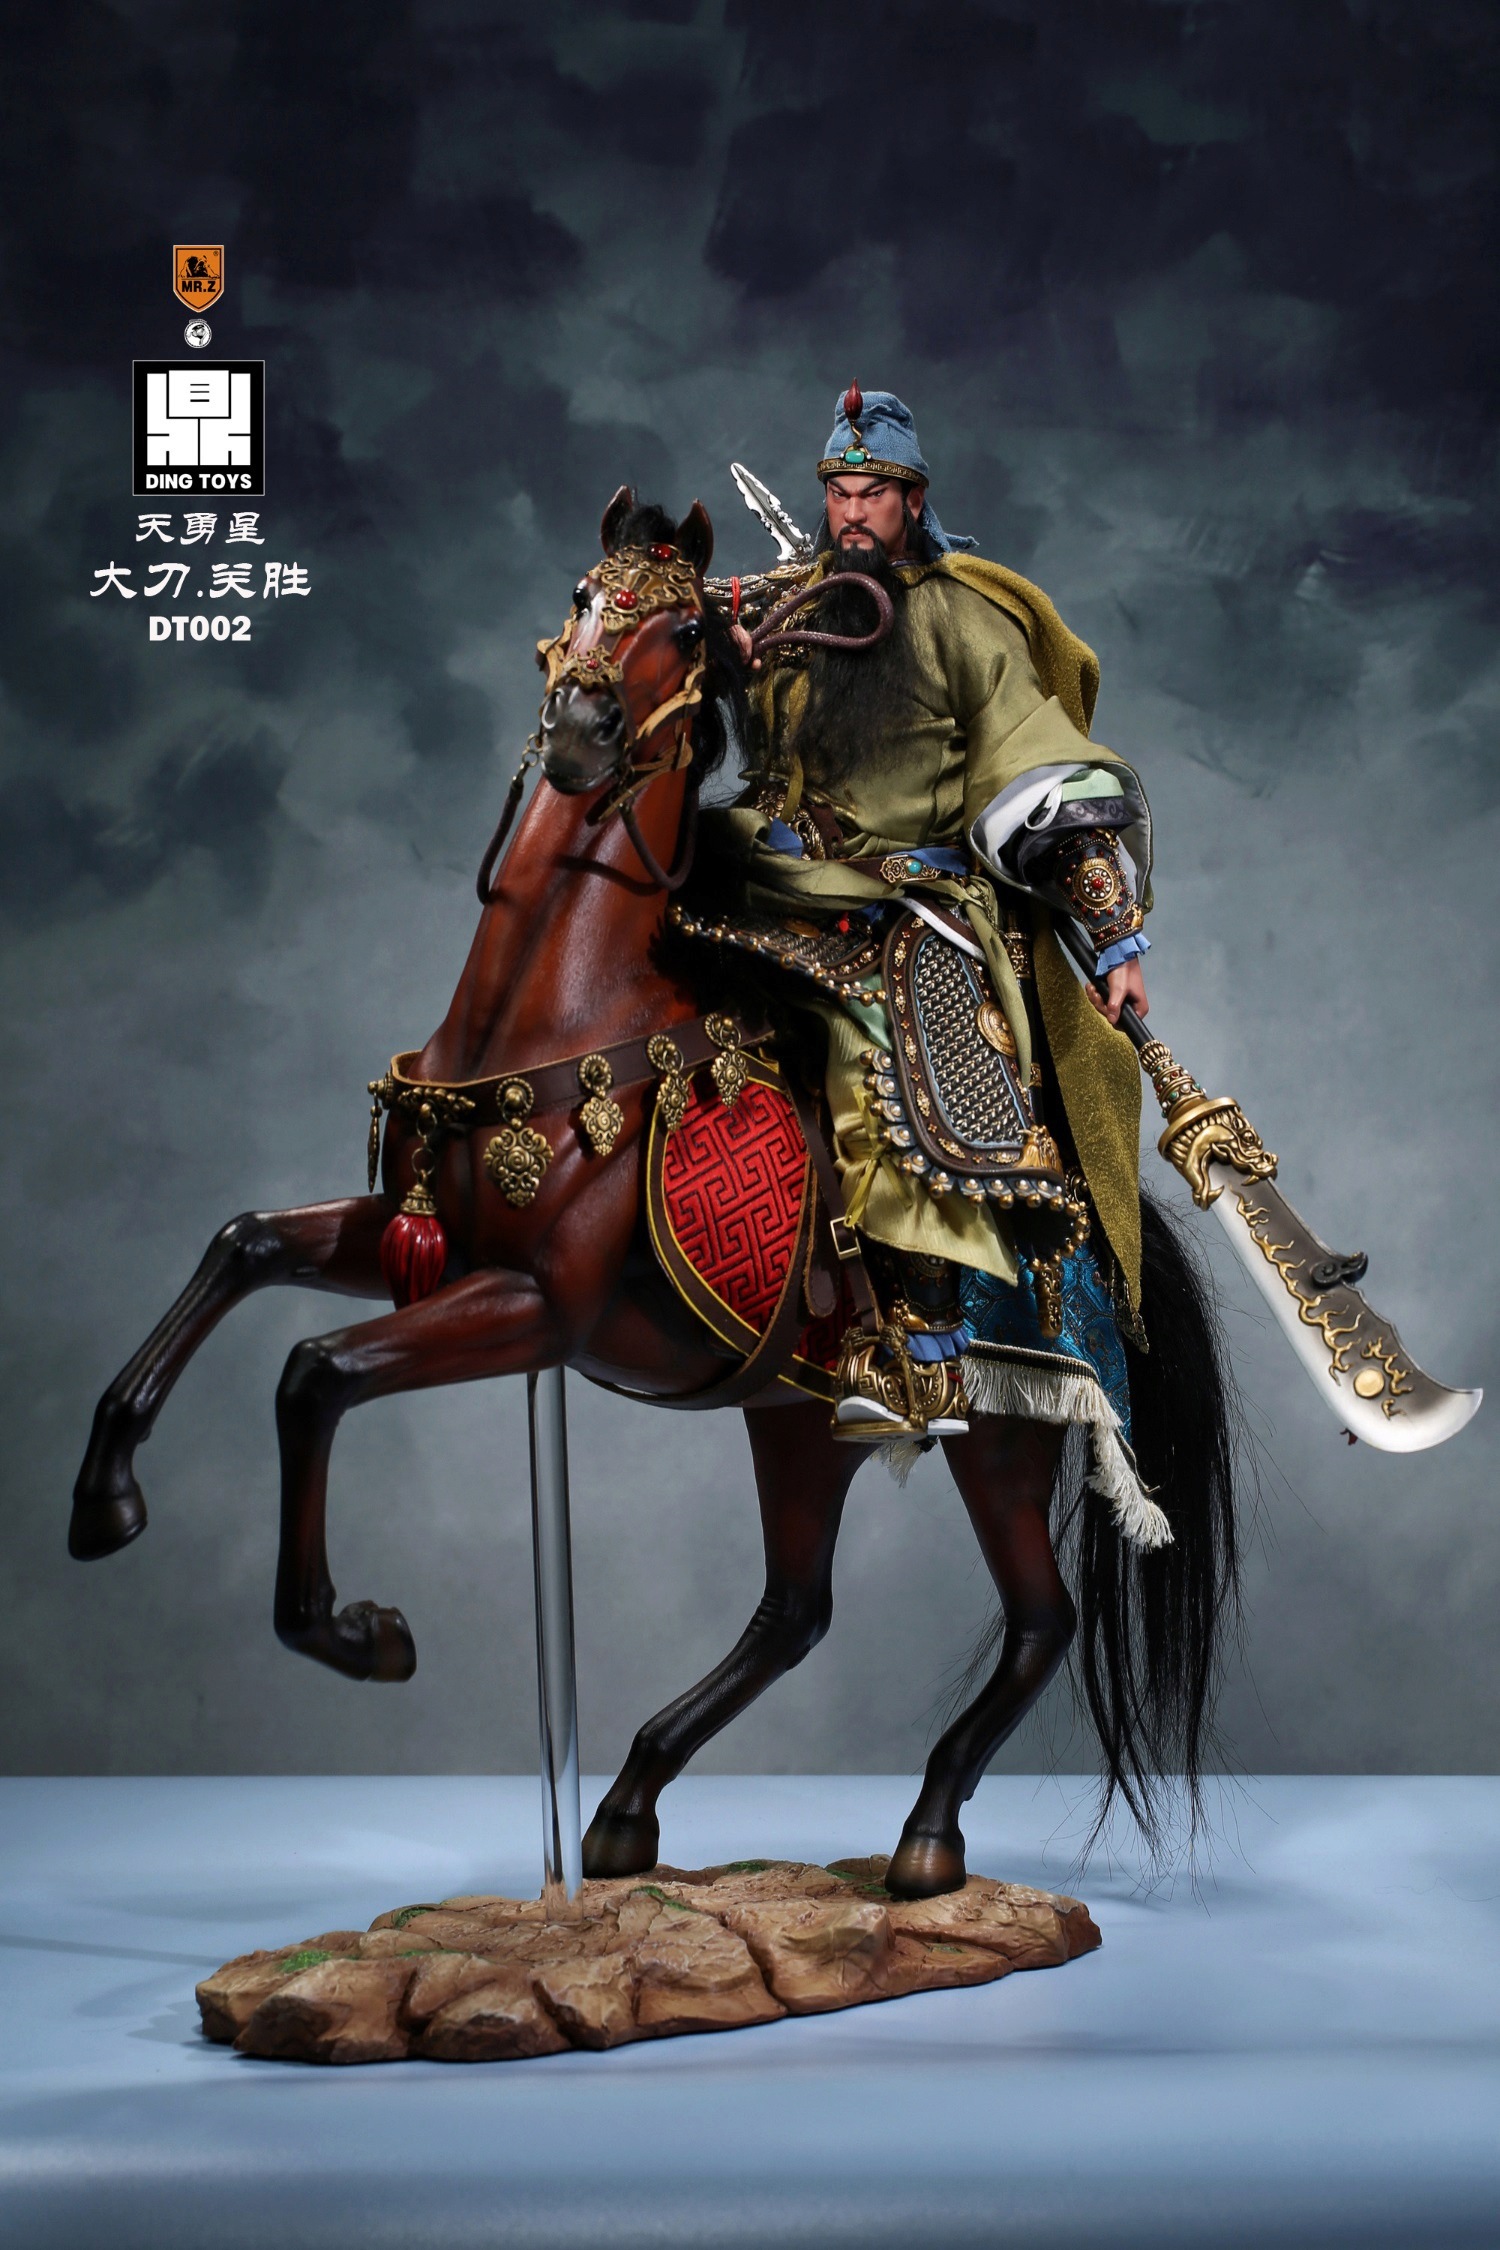 MrZ - NEW PRODUCT: Mr.Z x Ding Toys DT002 1/6 Scale 《Water Margin》Guan Sheng, War Horse 3431